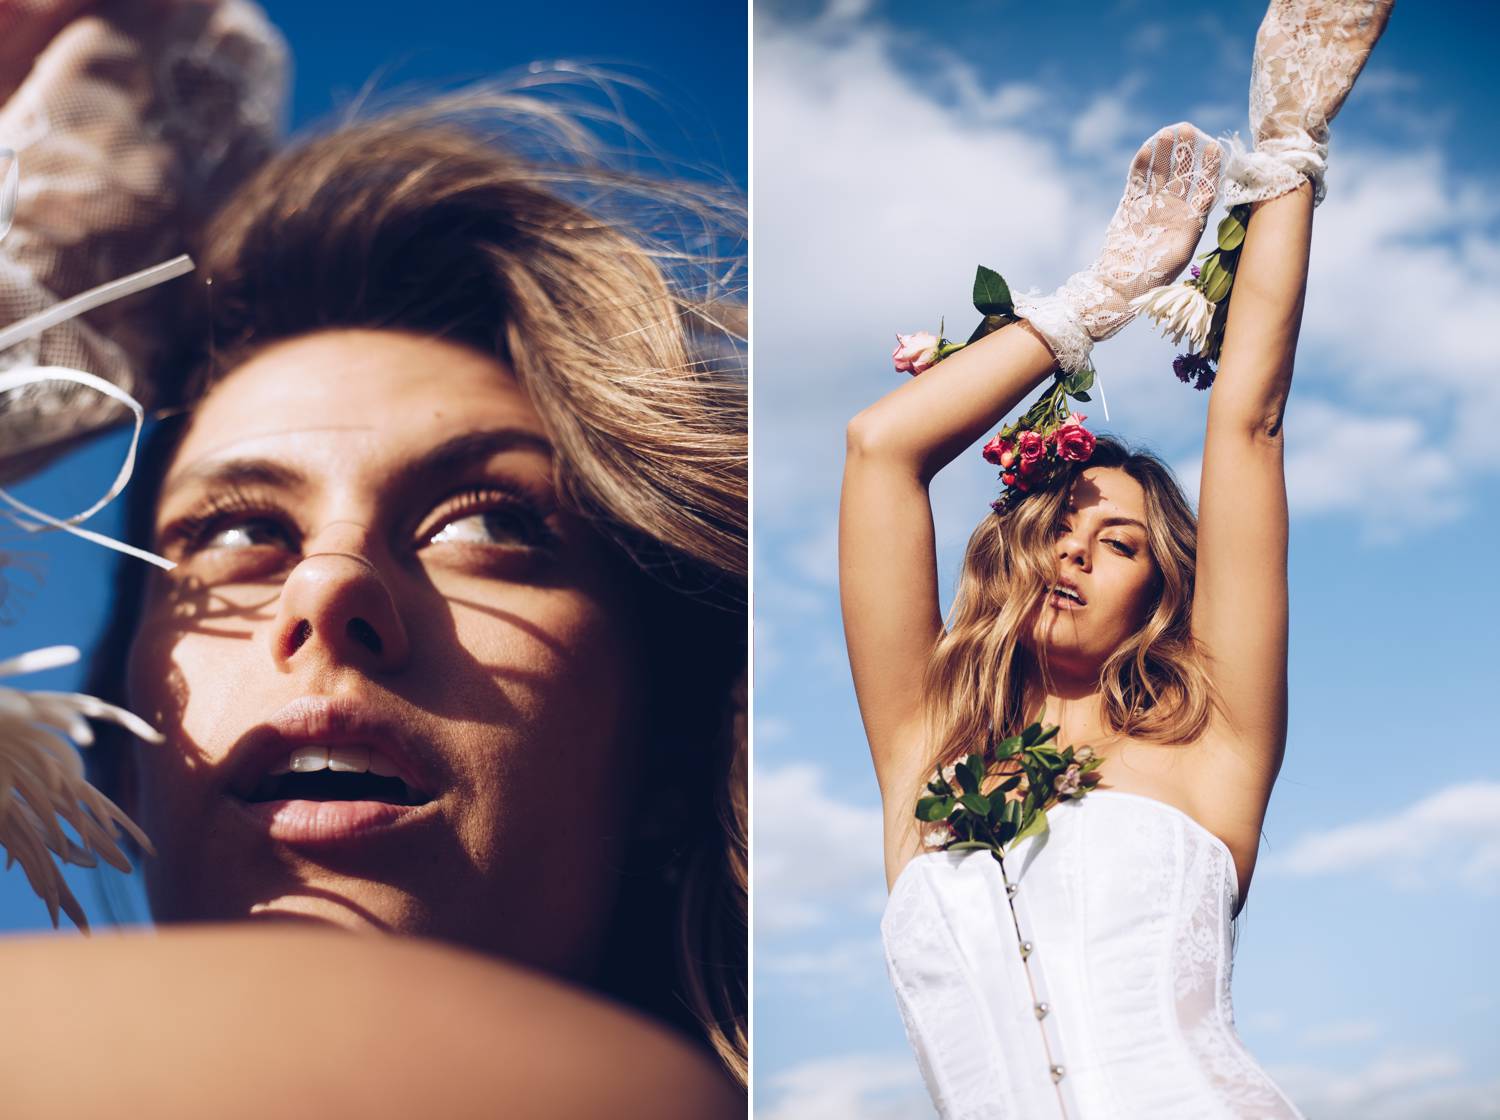 A model poses against a bright blue sky for ethereal beauty portraits